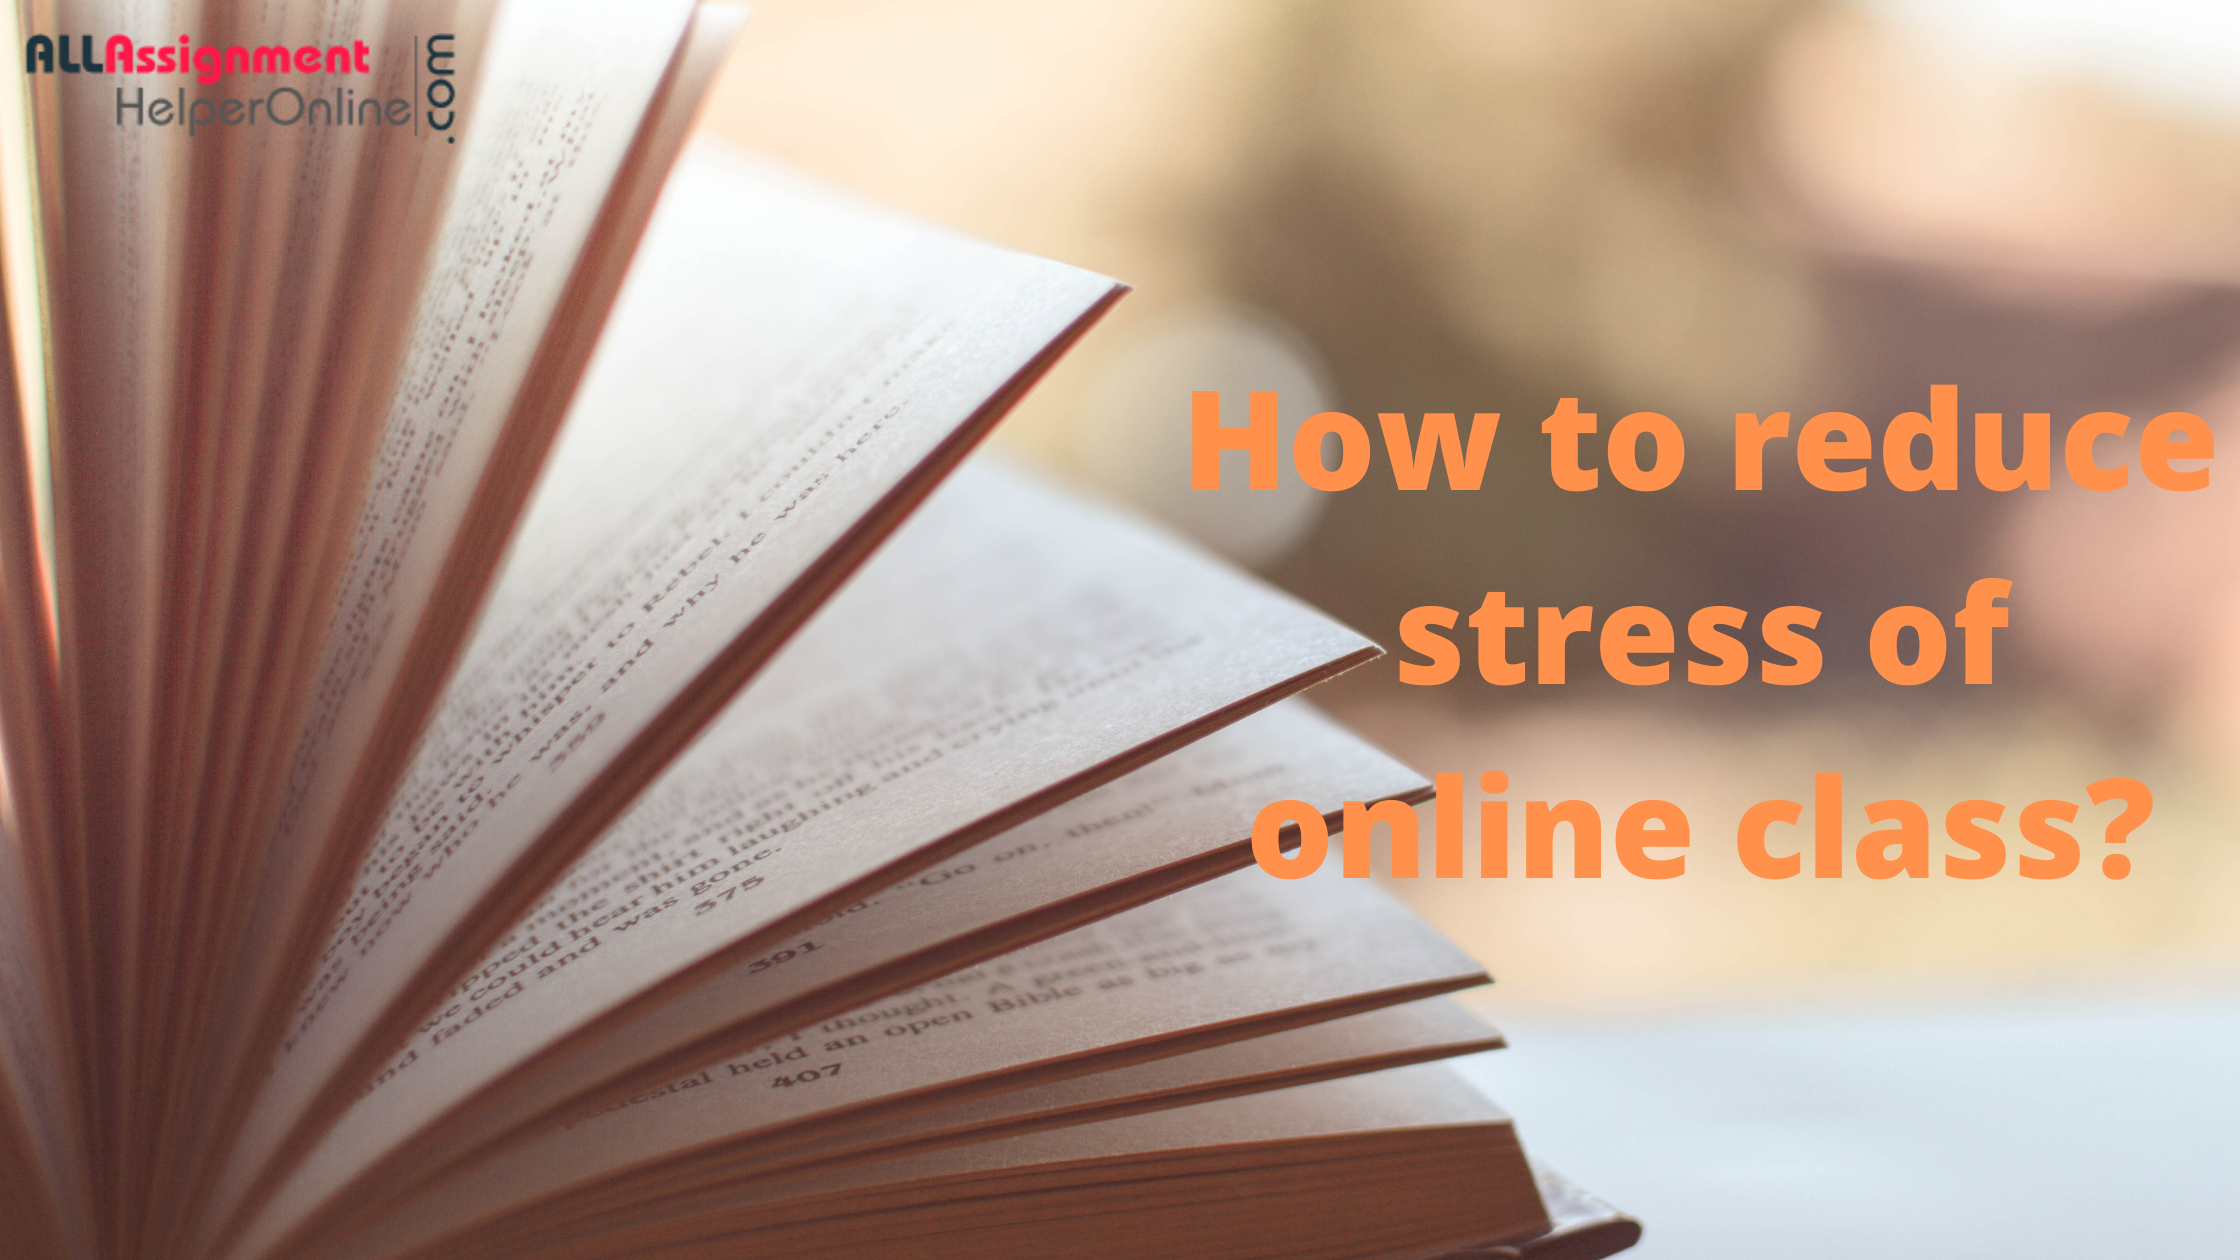 How to reduce stress of online class